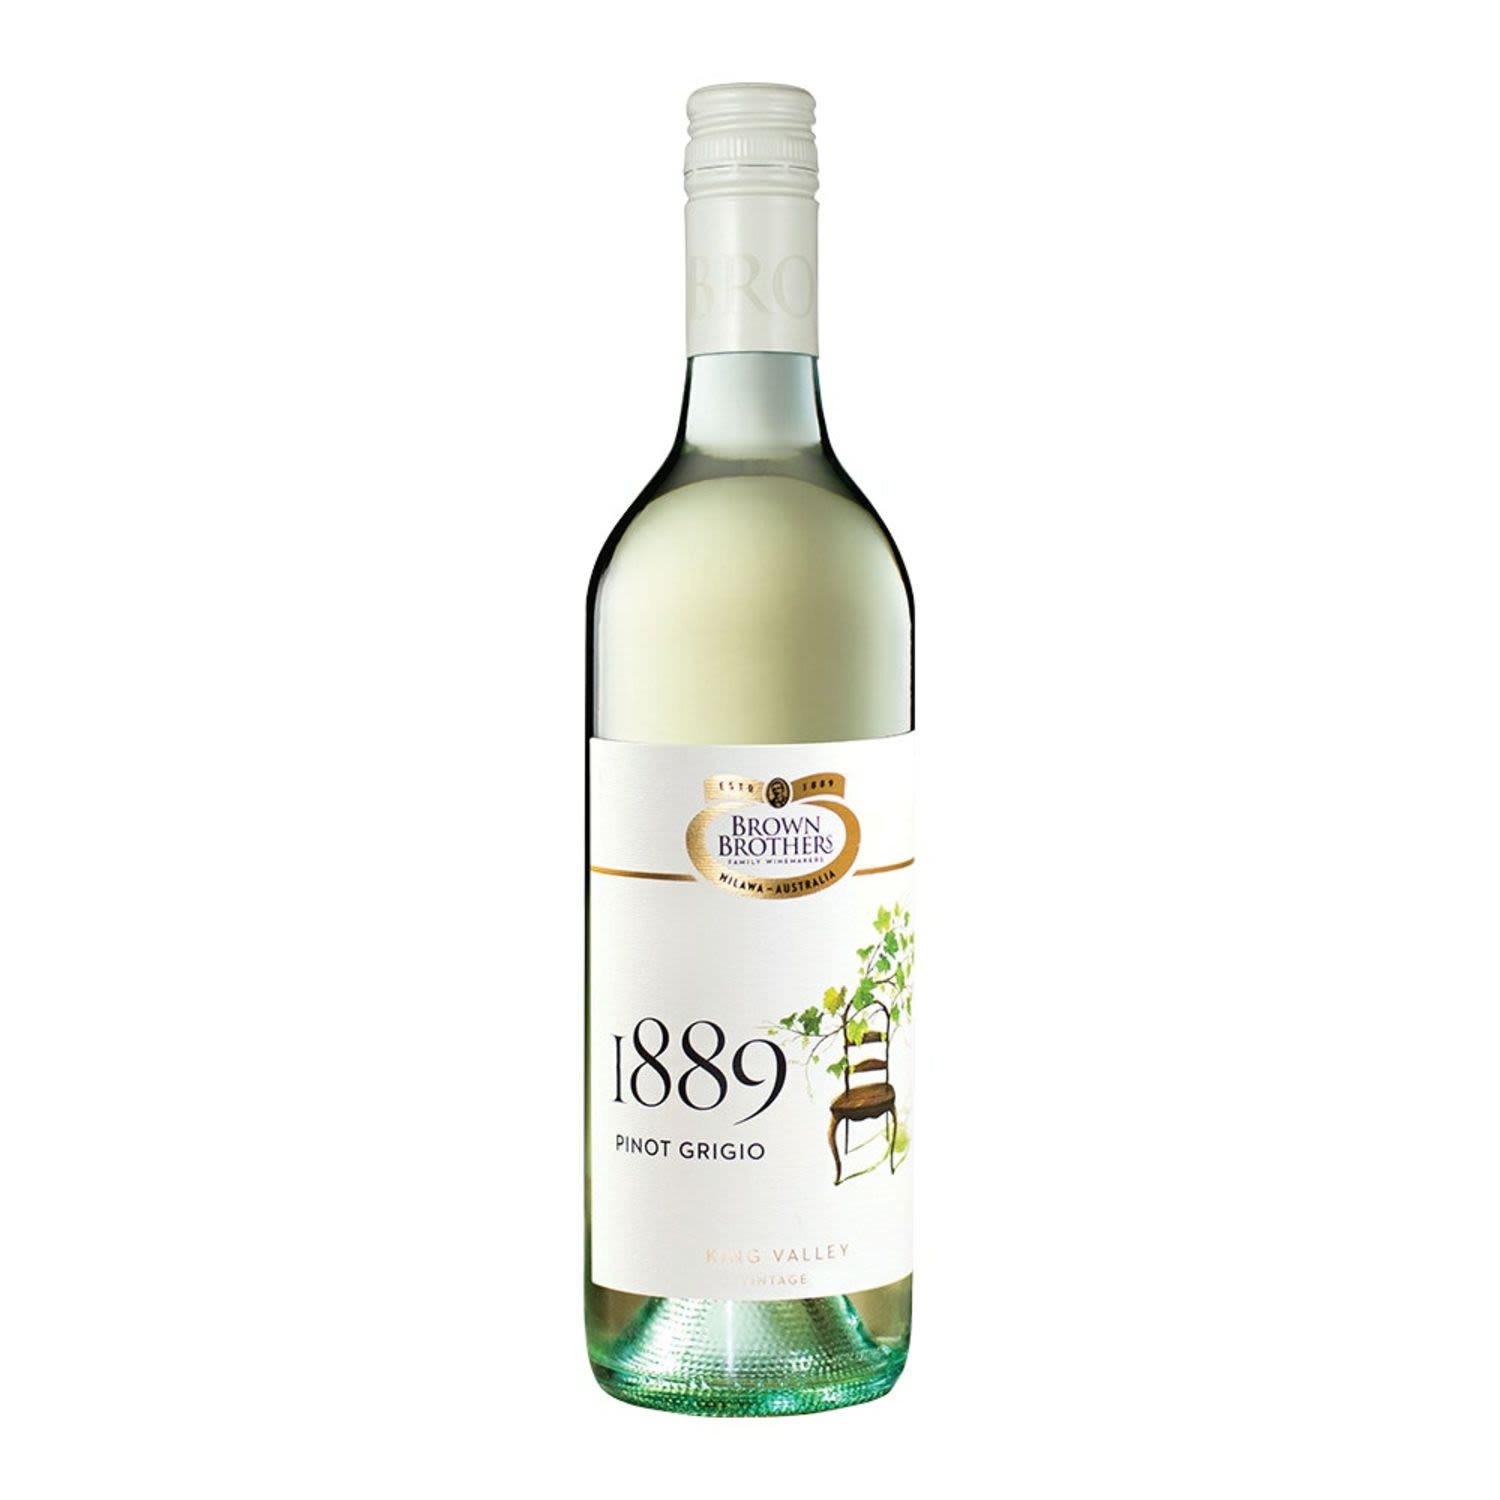 Unlike the French style, which is richer on the palate, our Pinot Grigio is crisp, fresh and savoury with peach and pear aromas. With excellent natural acidity, it makes a popular choice to enjoy on its own, with an antipasto platter or fresh seafood dishes. Best served chilled and enjoyed within 1-3 years of vintage.<br /> <br />Alcohol Volume: 12.50%<br /><br />Pack Format: Bottle<br /><br />Standard Drinks: 7.4<br /><br />Pack Type: Bottle<br /><br />Country of Origin: Australia<br /><br />Region: Victoria<br /><br />Vintage: '2019<br />